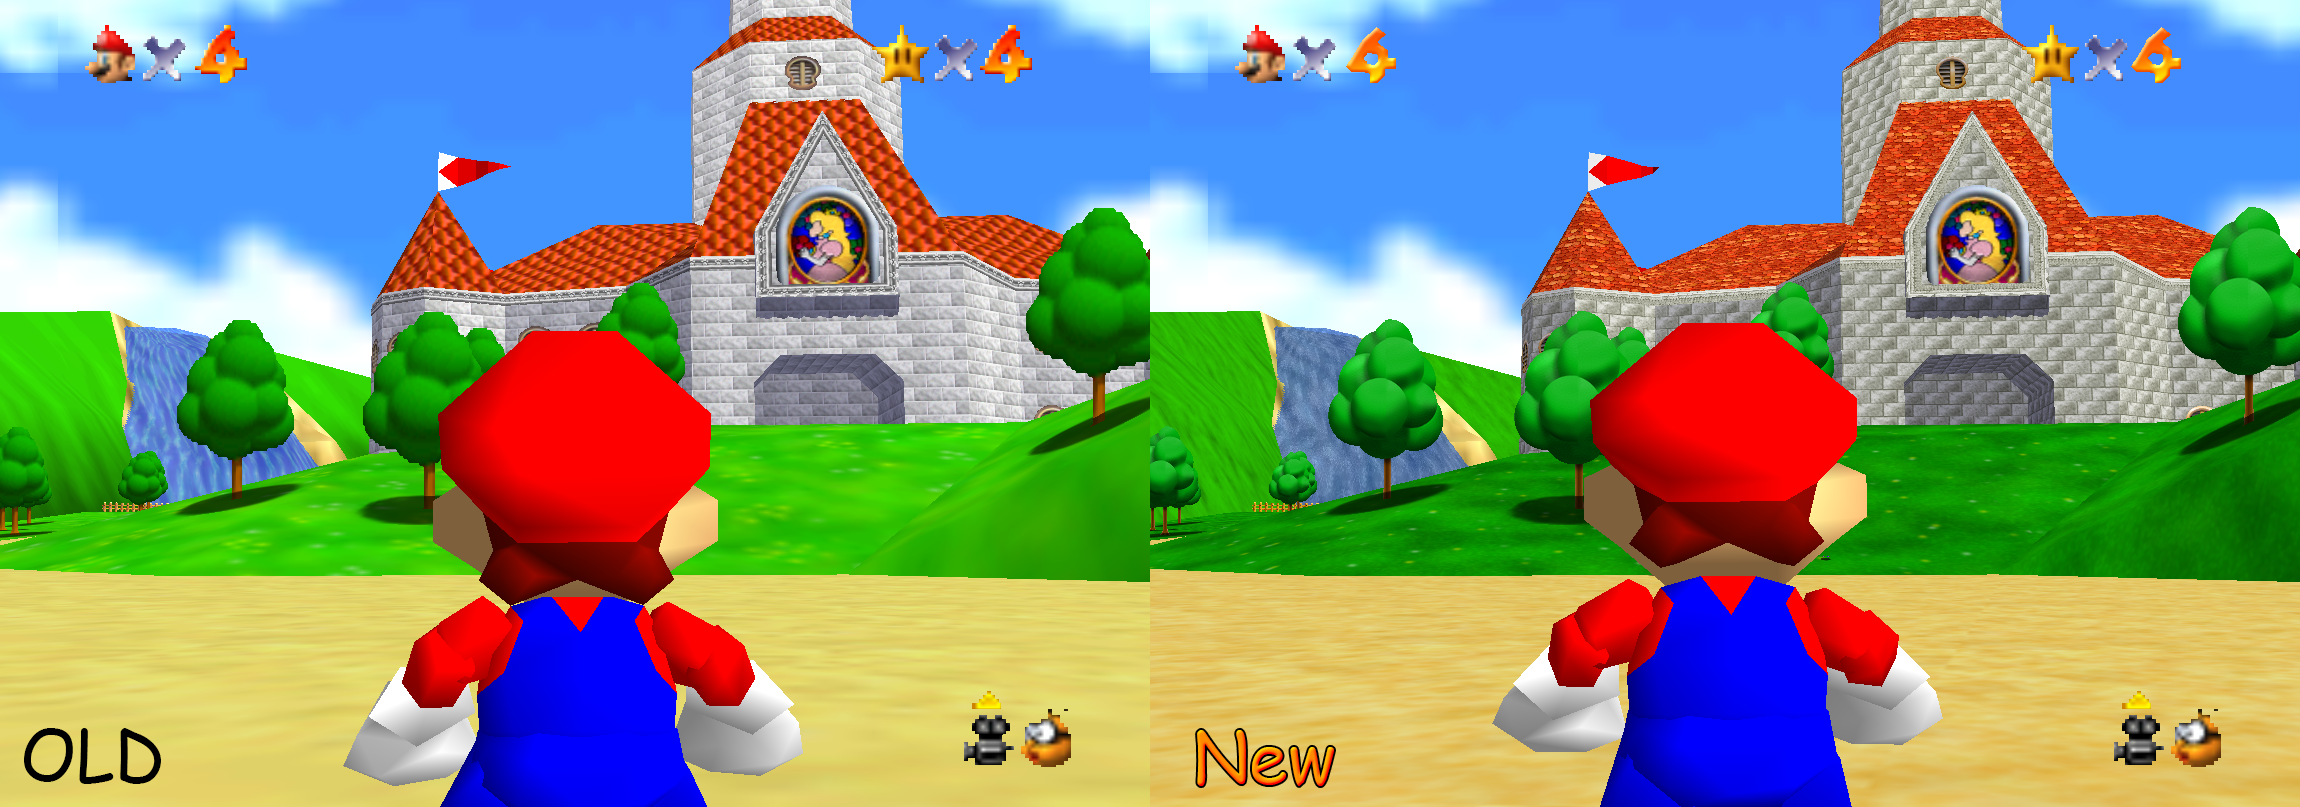 Super Mario High Resolution Texture Pack By Myownfriend On